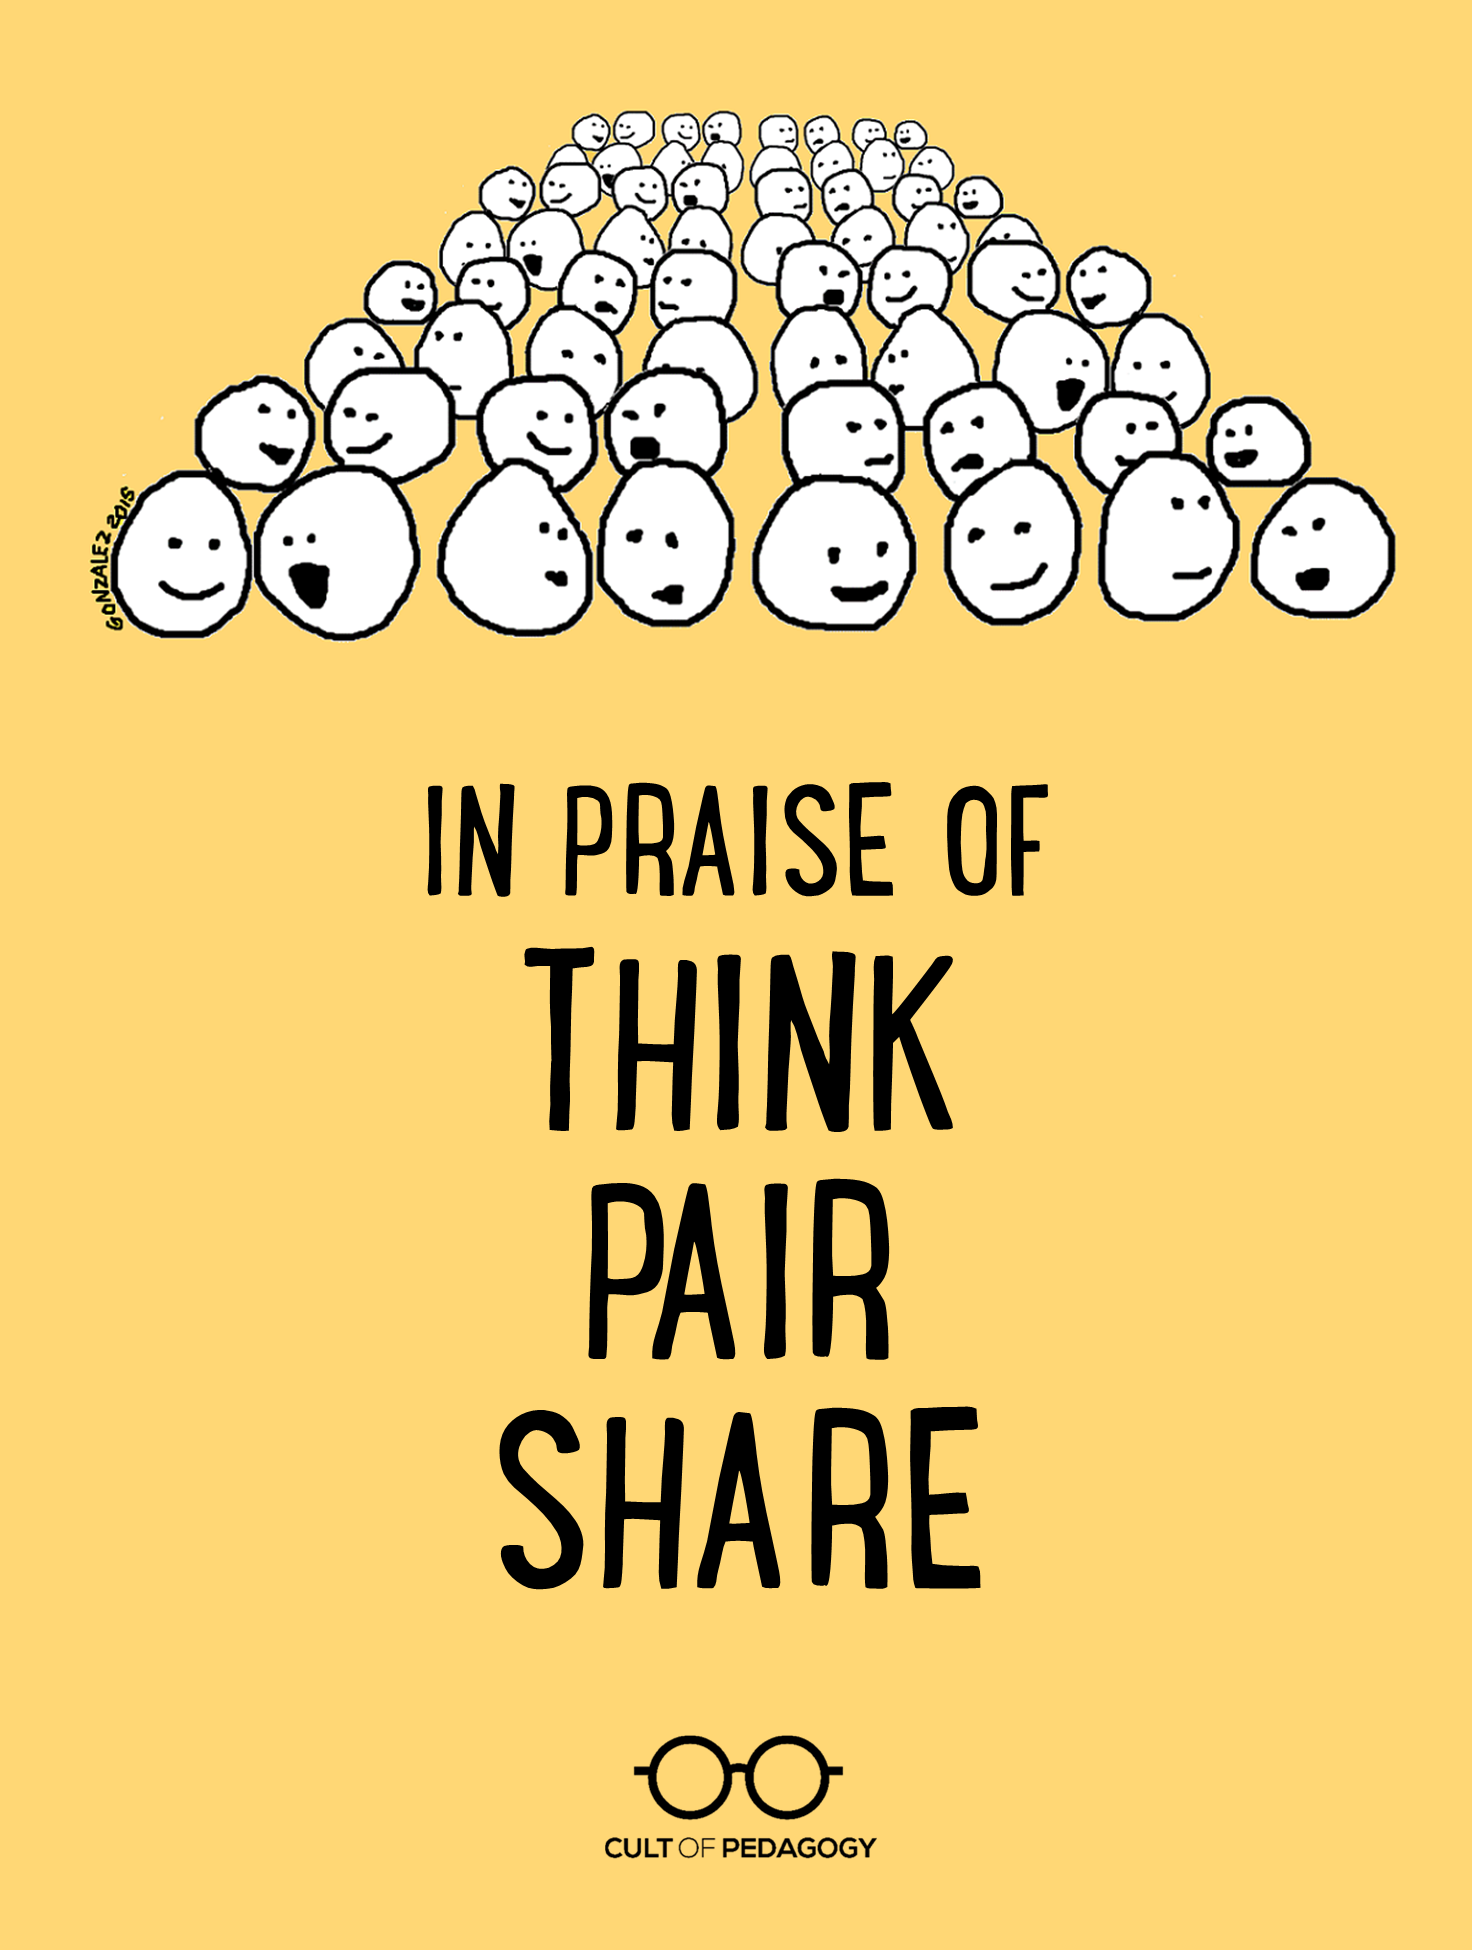 https://www.cultofpedagogy.com/wp-content/uploads/2015/01/Think-Pair-Share-7.png